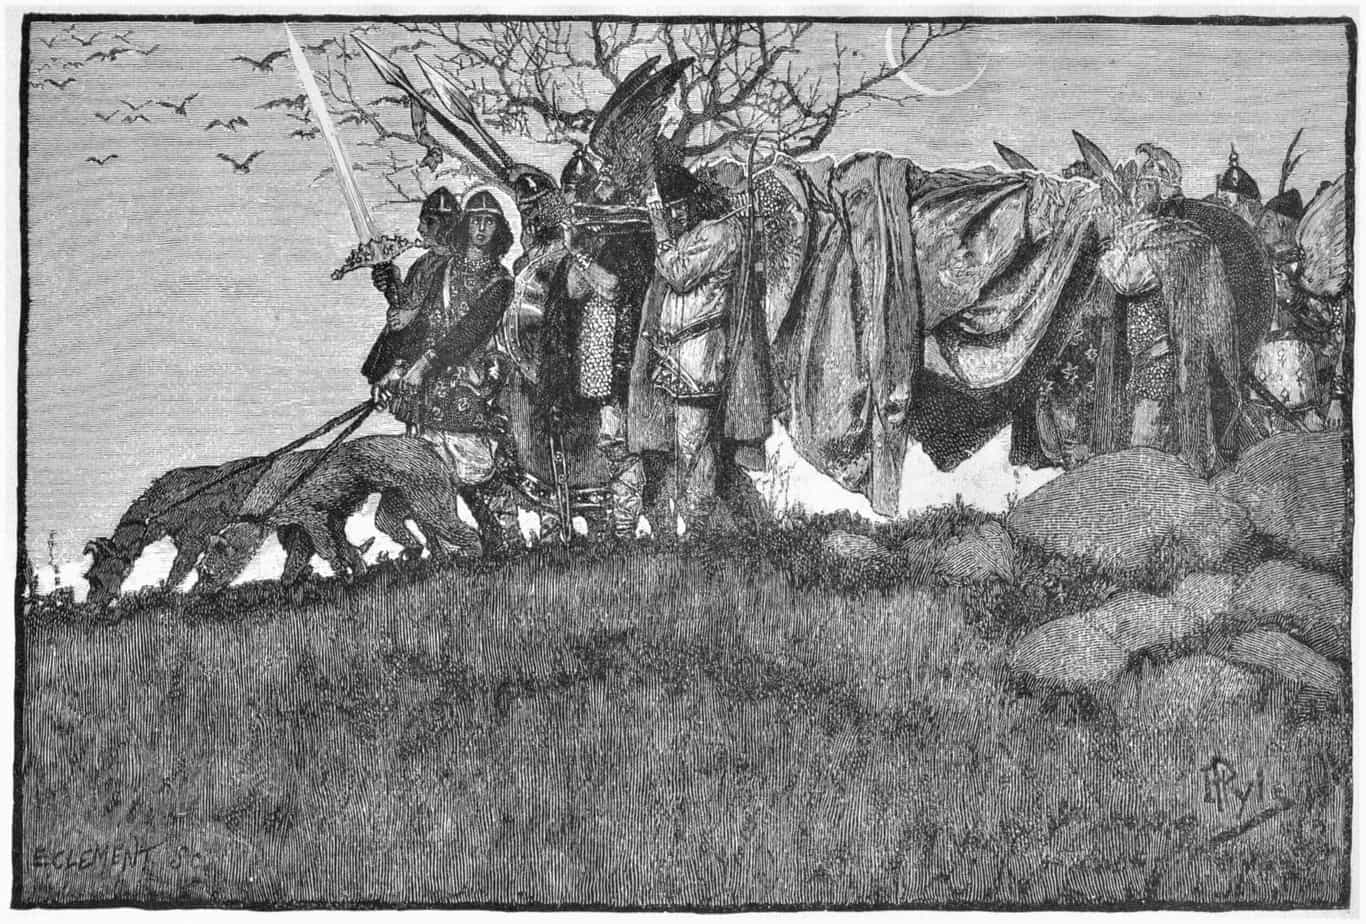 The Story of Siegfried illustrated by Howard Pyle (American, 1853-1911)